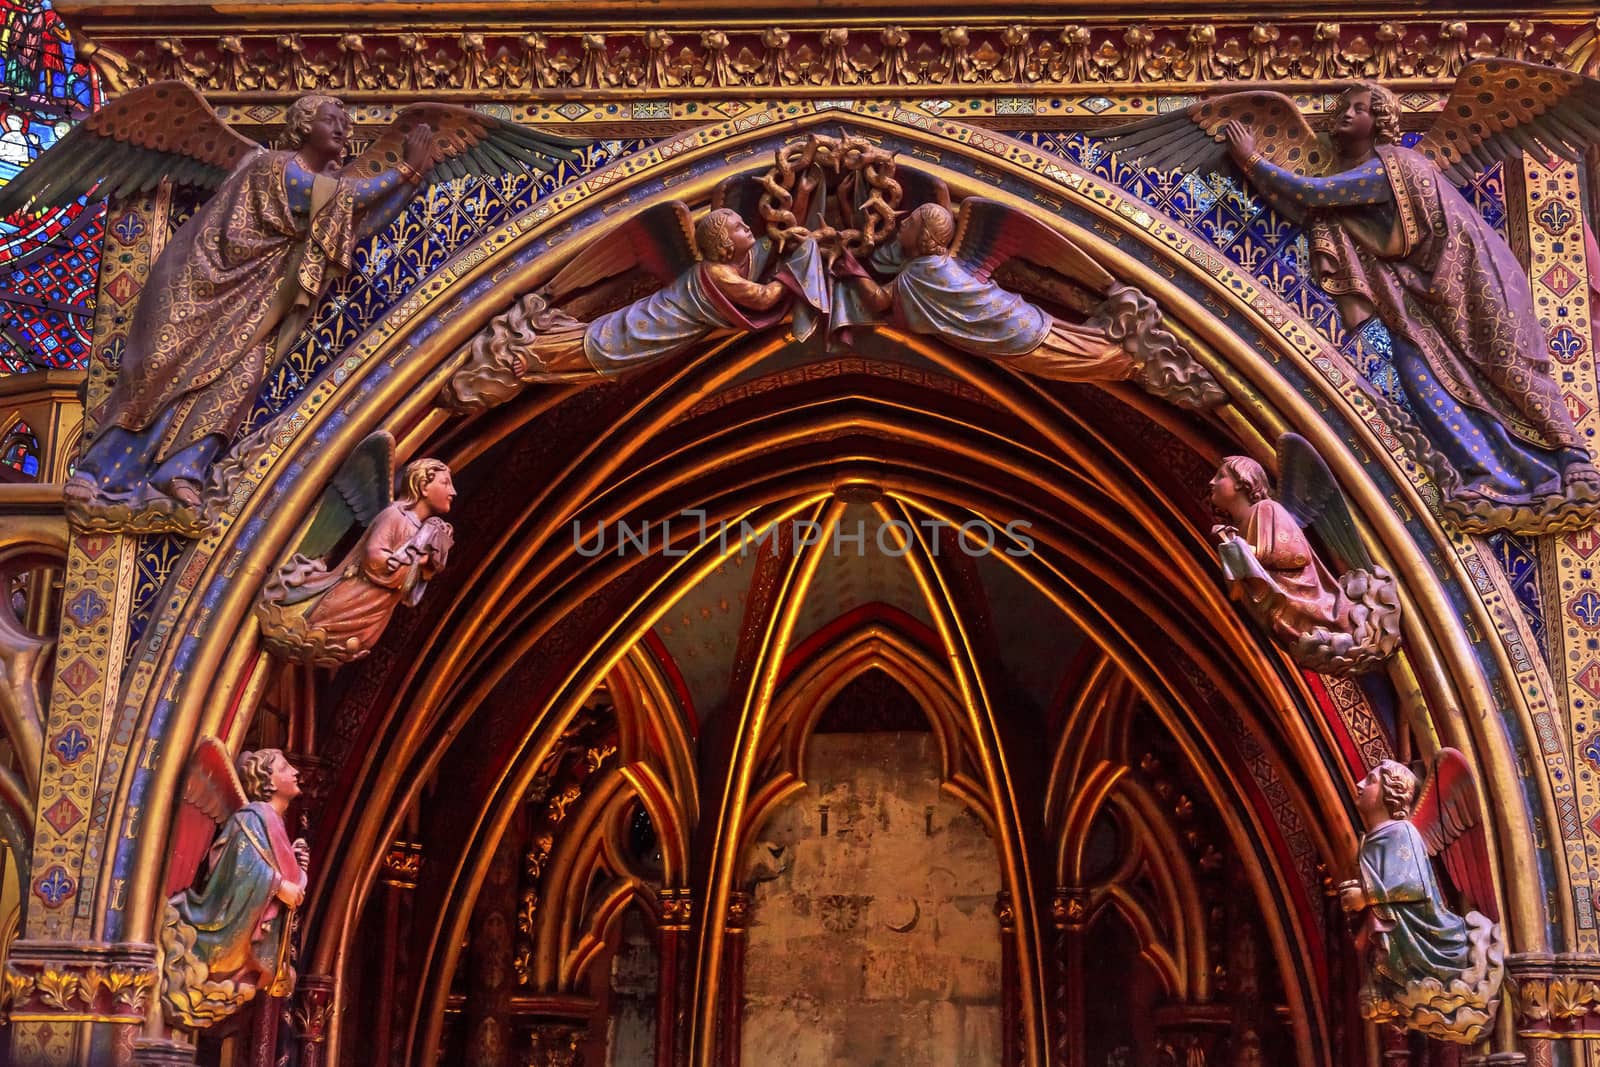 Angels Wood Carvings Arch Cathedral Saint Chapelle Paris France.  Saint King Louis 9th created Sainte Chappel in 1248 to house Christian relics, including Christ's Crown of Thorns.  Stained Glass created in the 13th Century and shows various biblical stories along wtih stories from 1200s.